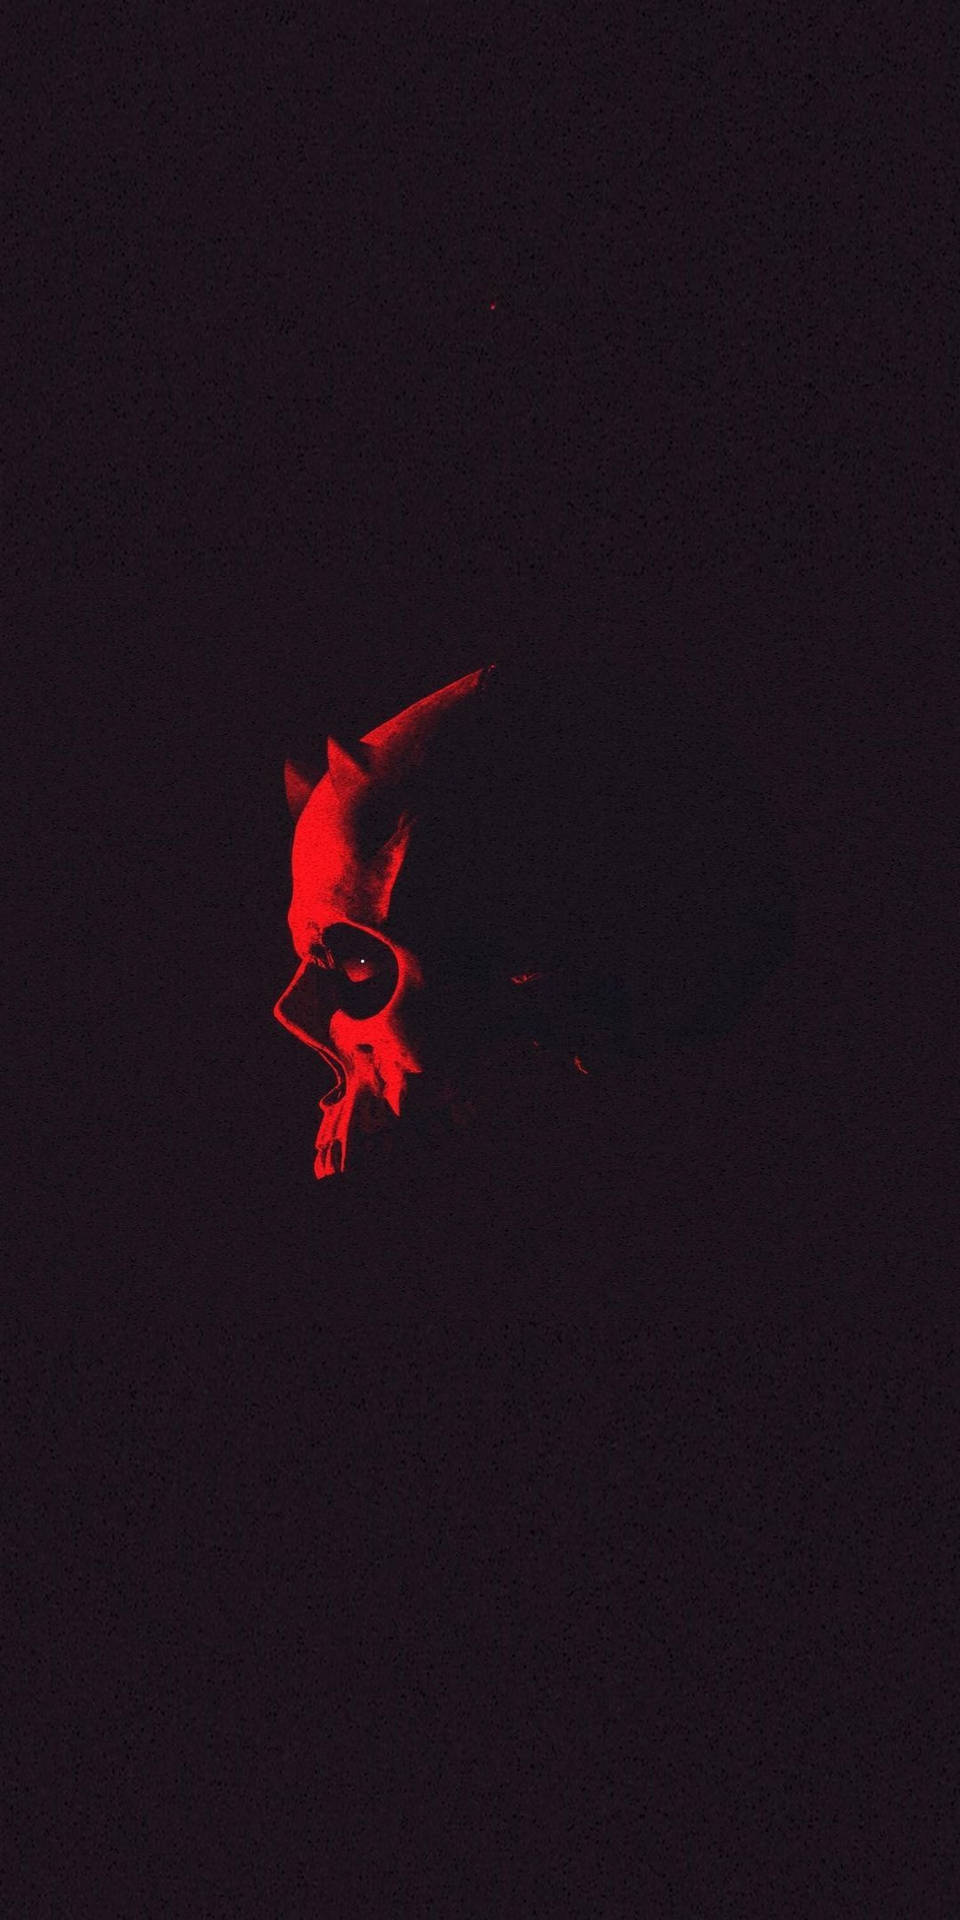 Daredevil Abstract Mask Silhouette